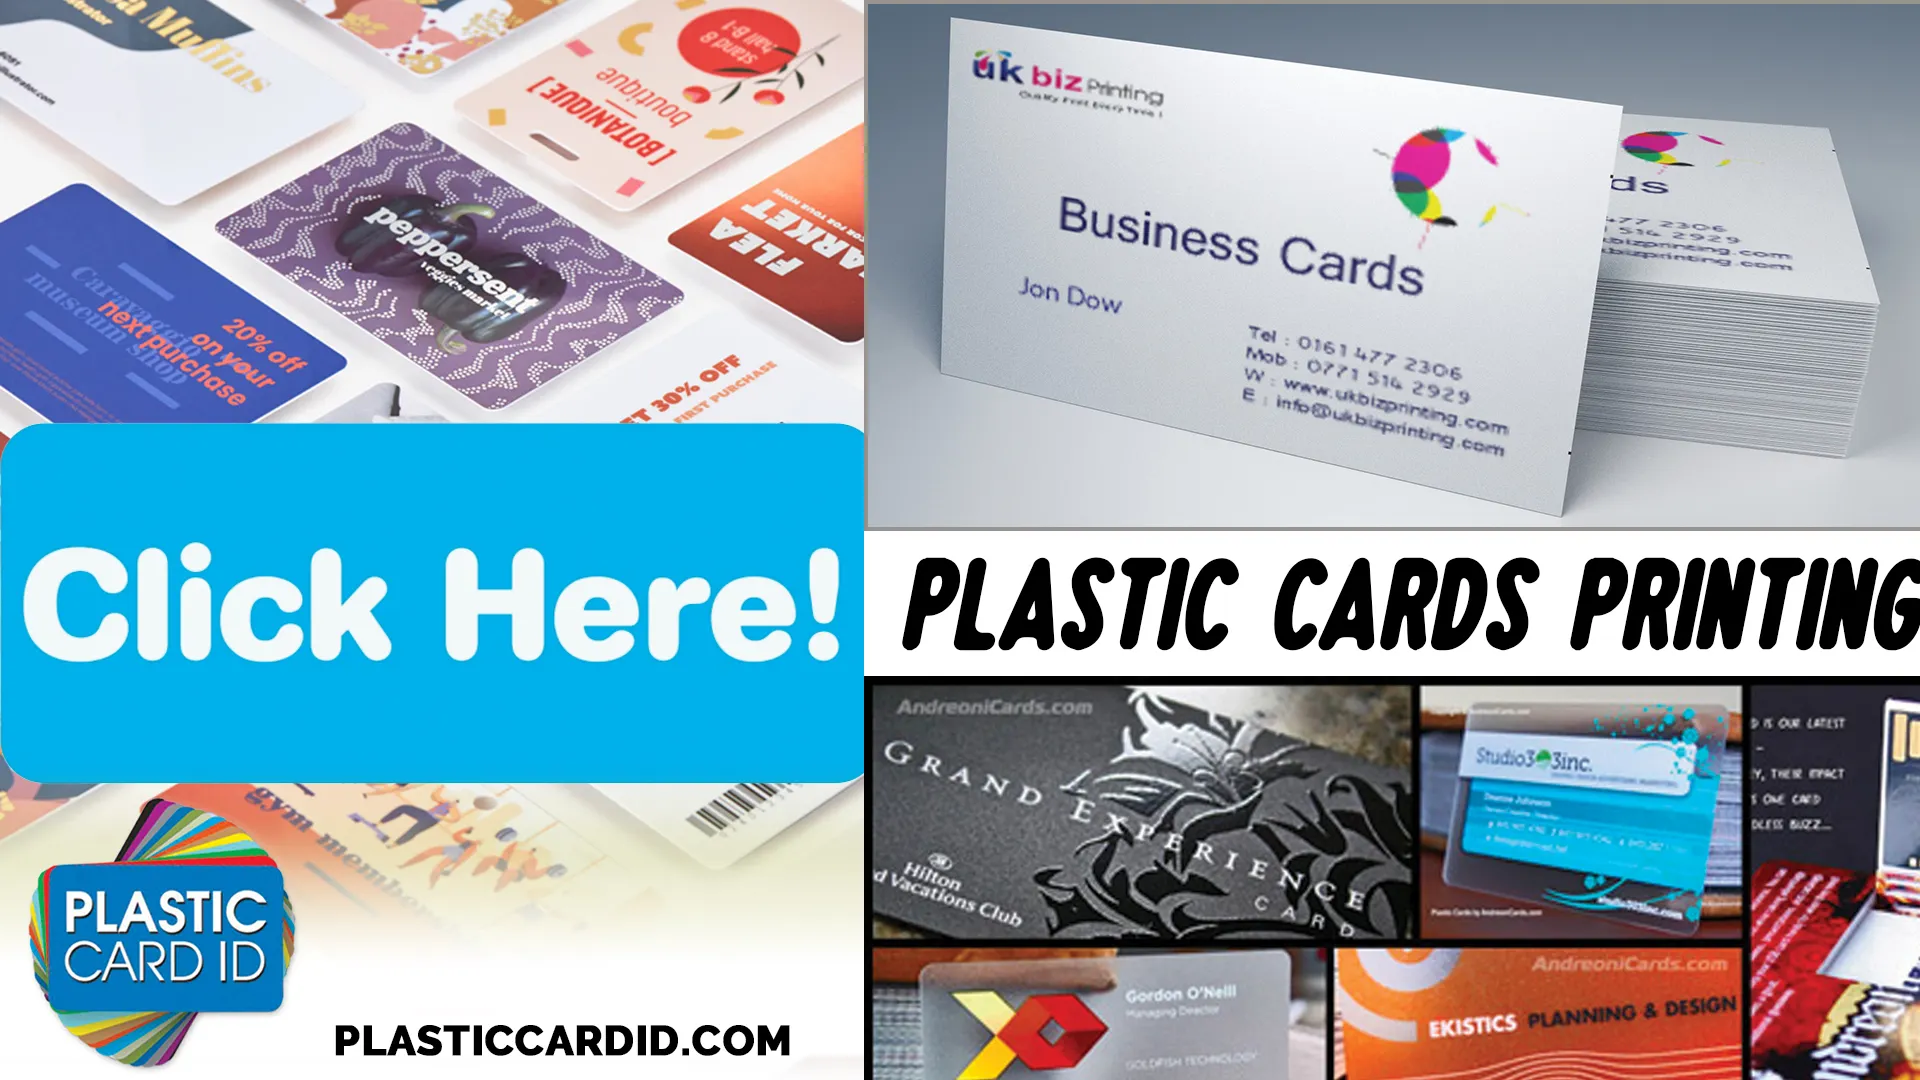 Staying Ahead: Ongoing Innovations at Plastic Card ID
